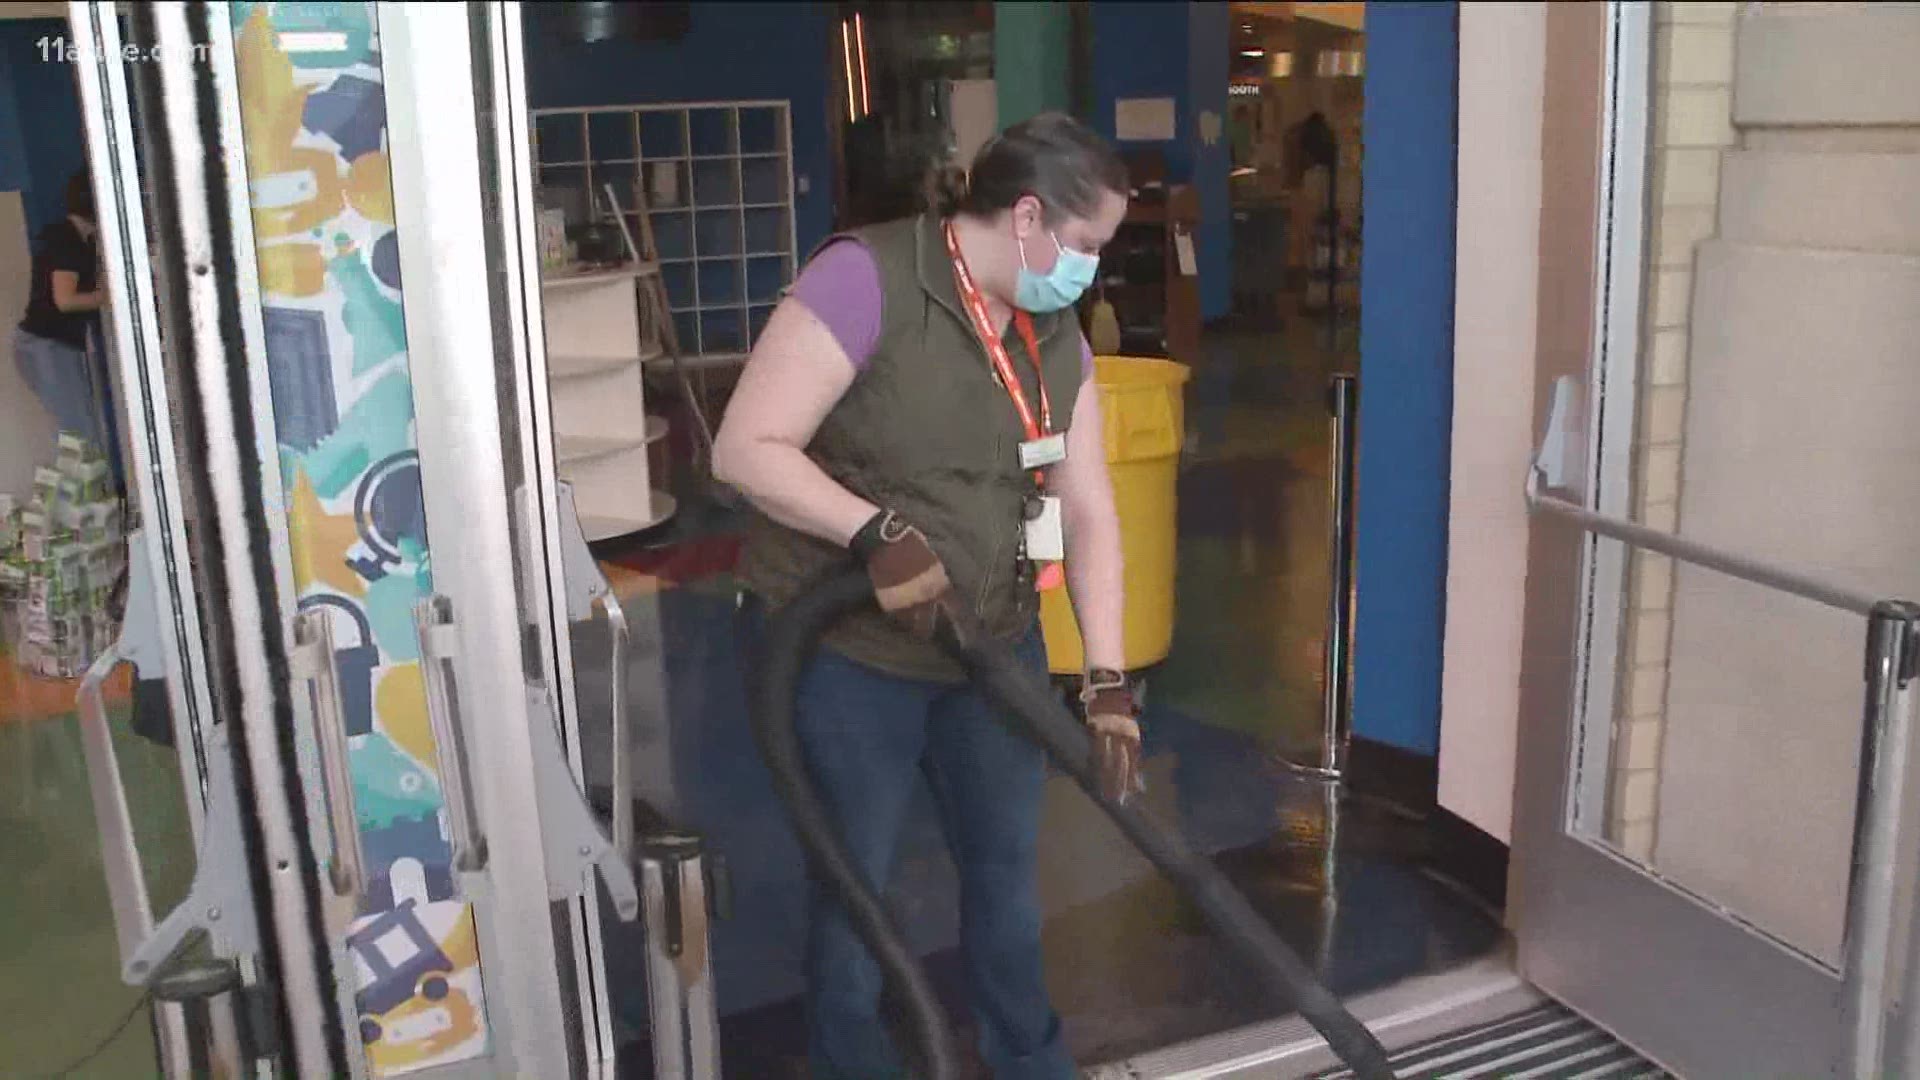 Volunteers showed up early Sunday morning to help clean up the shards of glass and other debris around the Atlanta Children's Museum following the damage there.